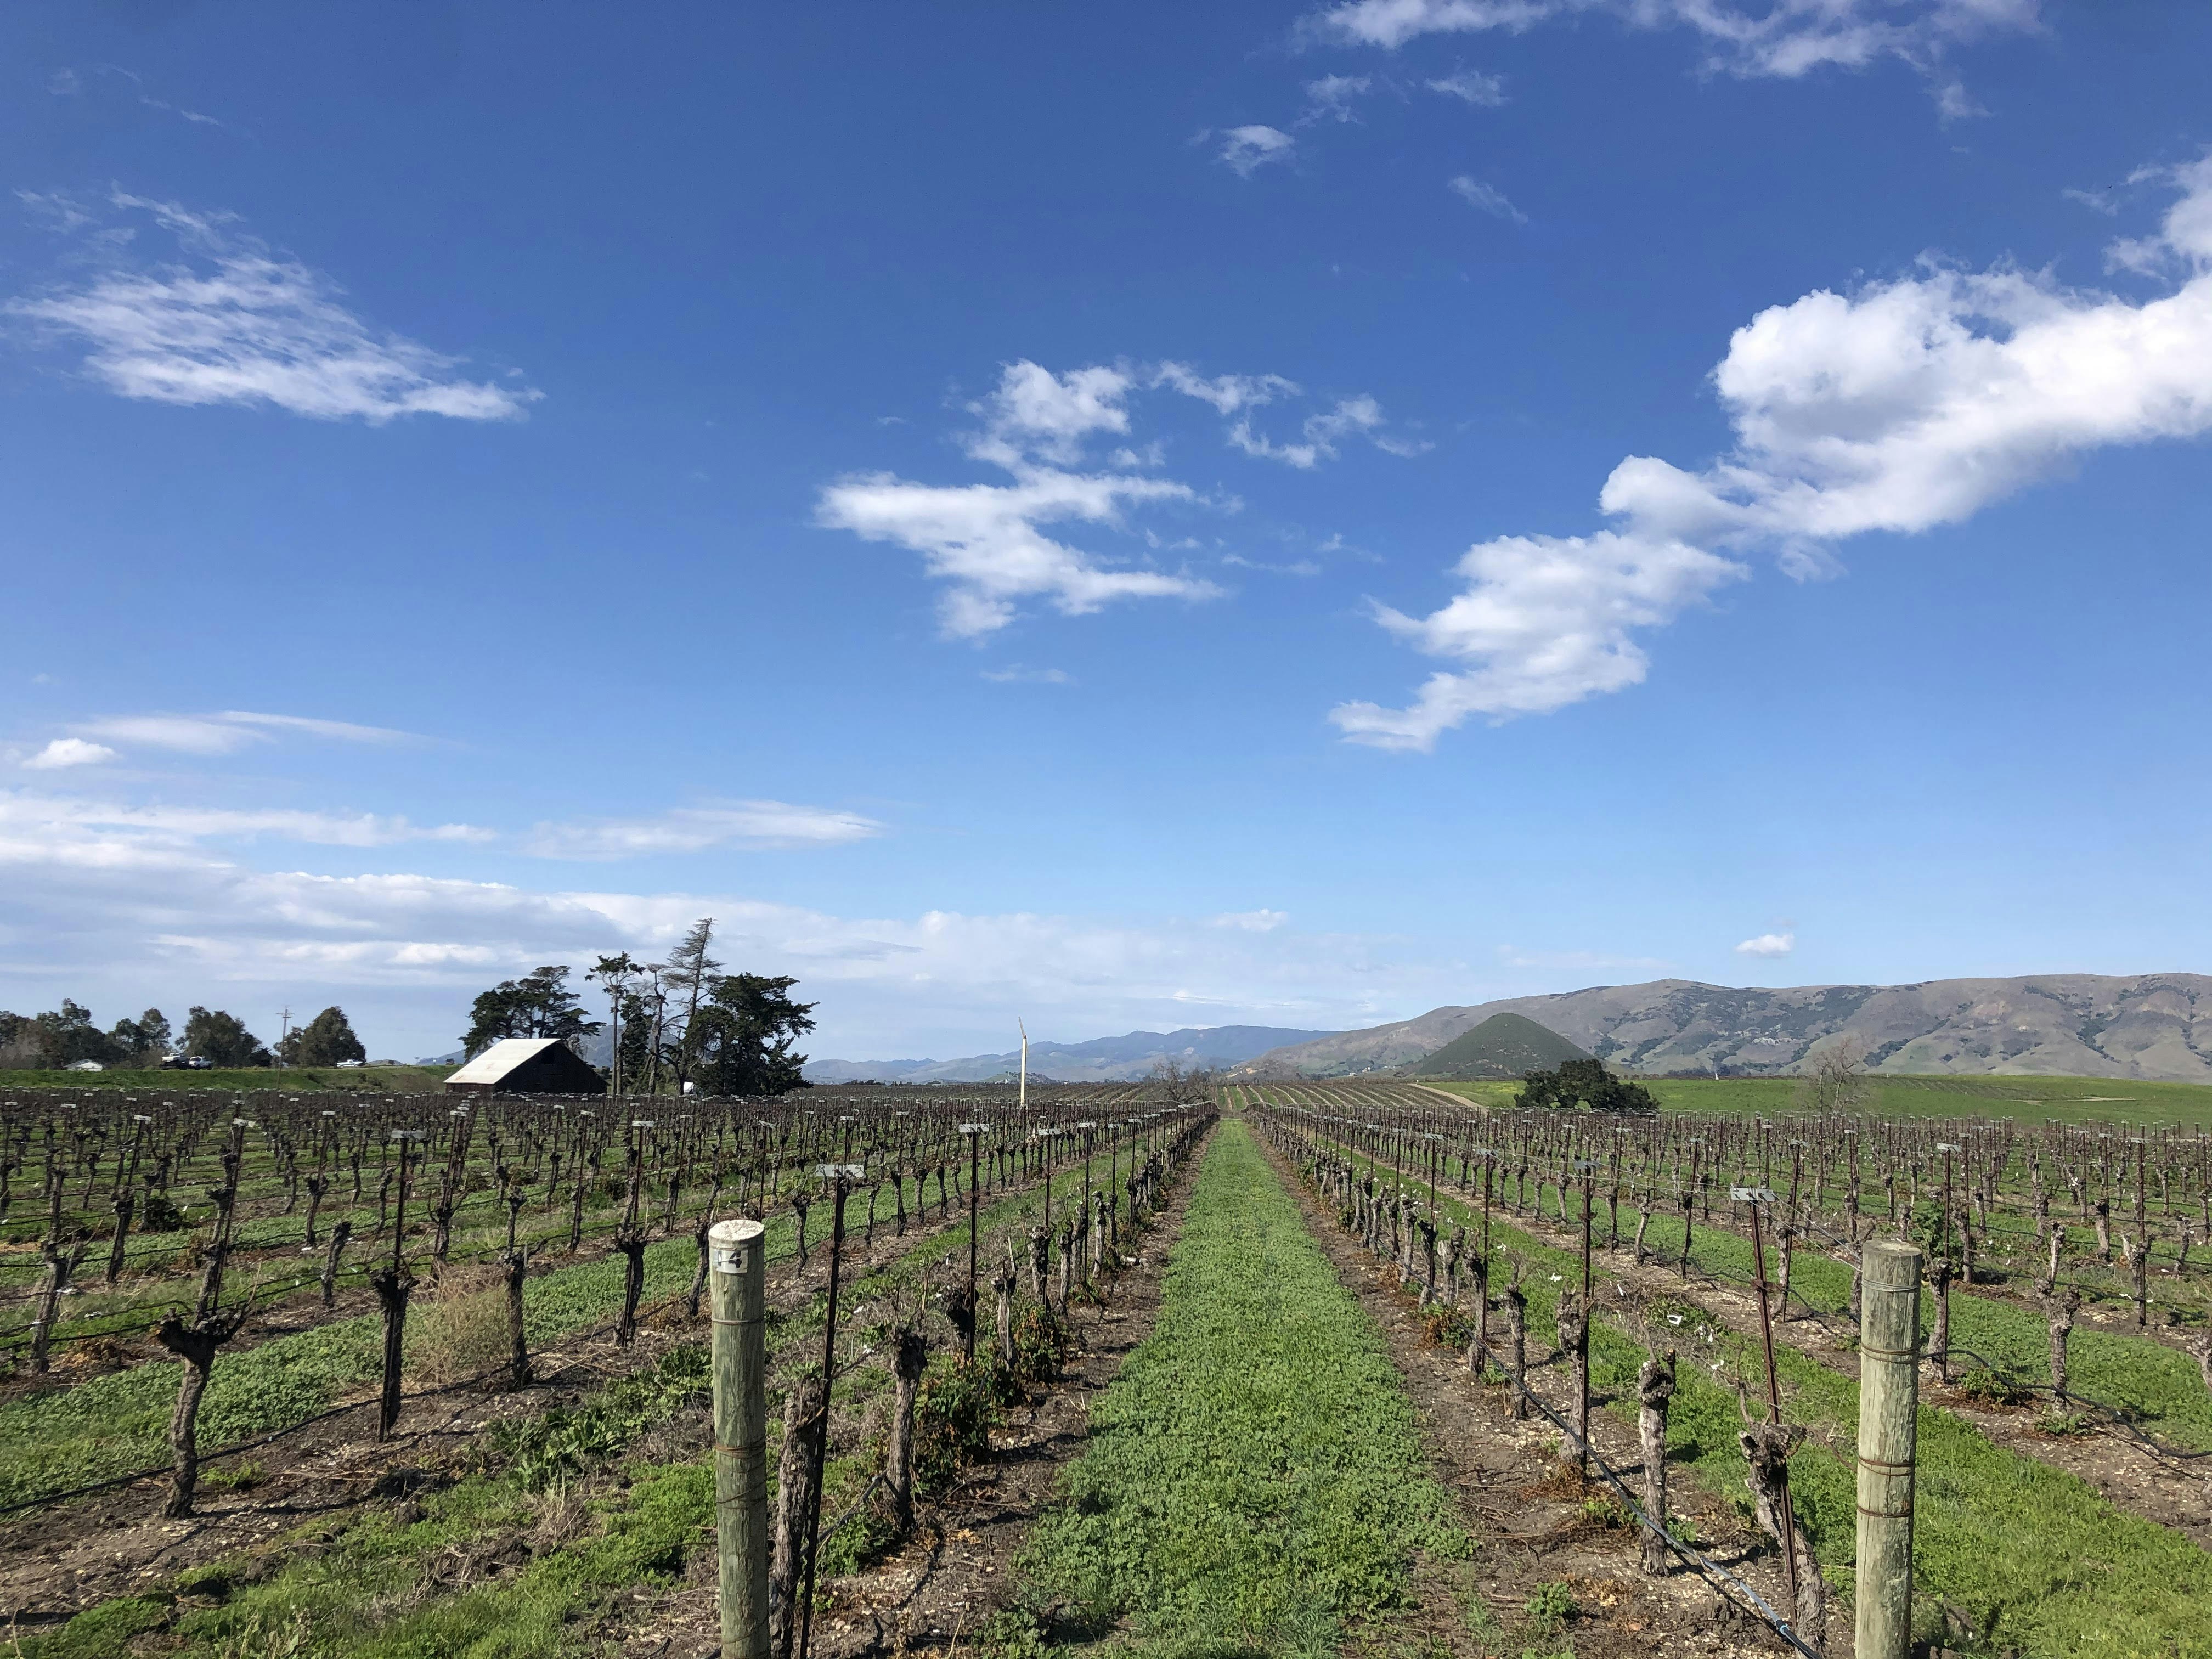 In the distance, blue and brown mountains roll diagonally over the landscape, stopping the long rows of vineyards that go straight out from the viewer's vantage point. The vines are bare with strips of grass between teh rows. To the left is the light roof of a low A frame farm structure.